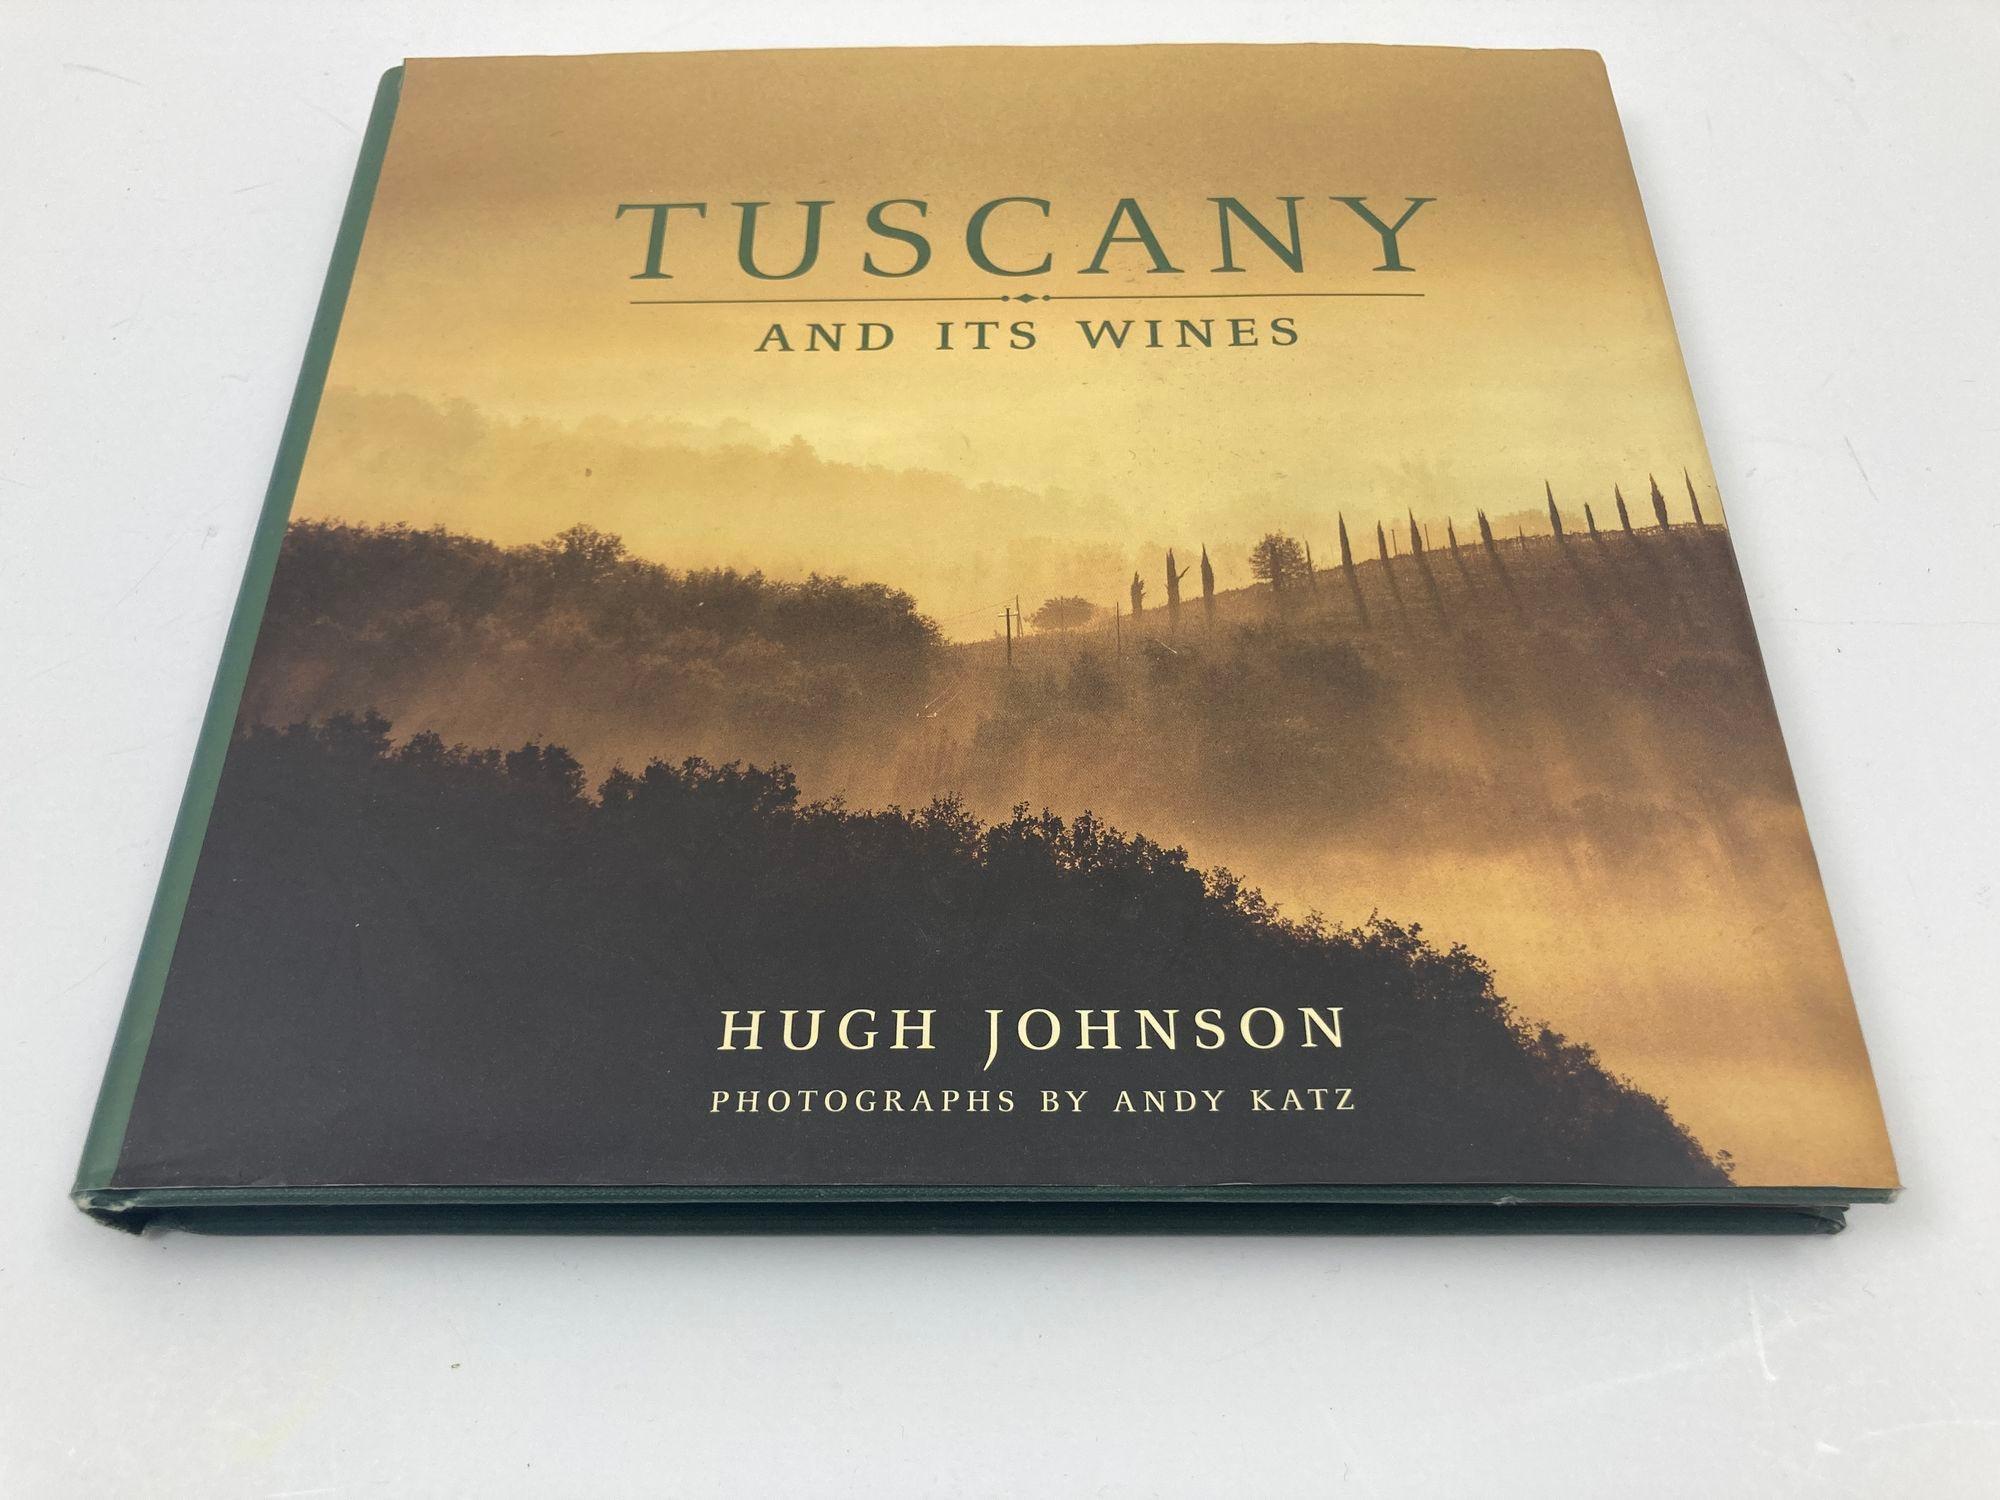 Tuscany and Its Wines By Hugh Johnson hardcover book 2000.
Join world-renowned wine writer Hugh Johnson in this beautiful homage to Tuscany.
Experience its history, landscapes, towns, villages, people, cuisine, and above all, its wines and vineyards